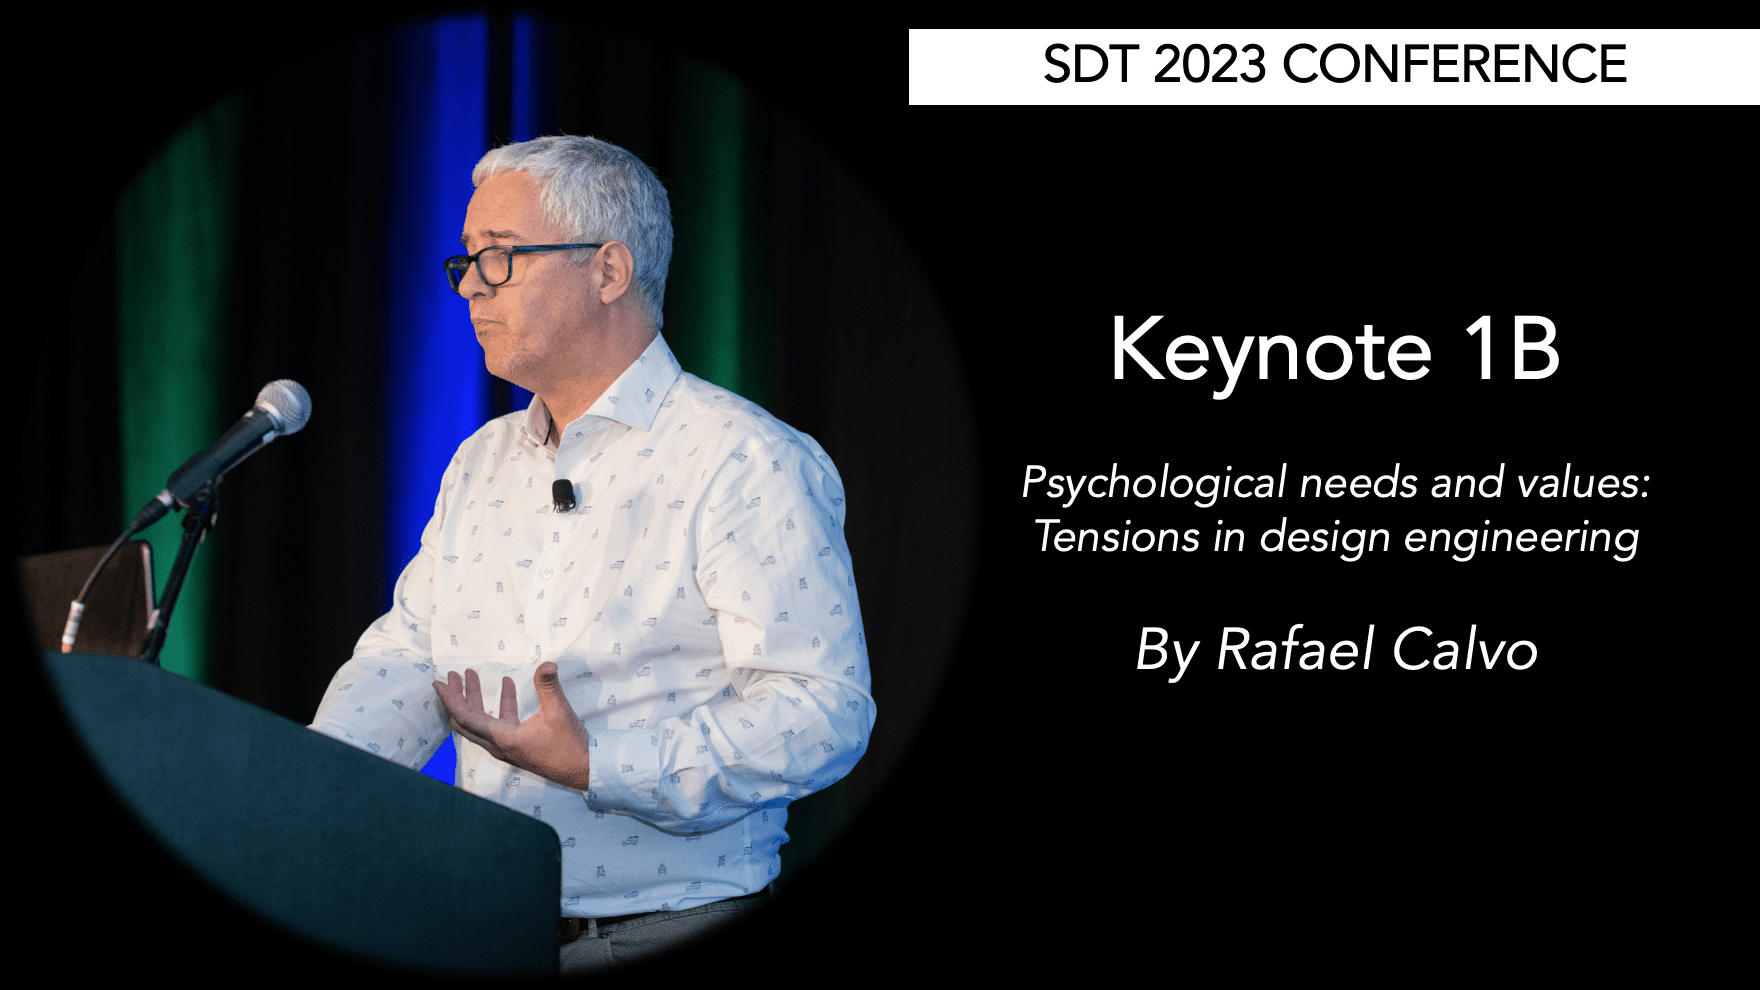 Psychological needs and values Tensions in design engineering  Rafael Calvo keynote  SDT2023